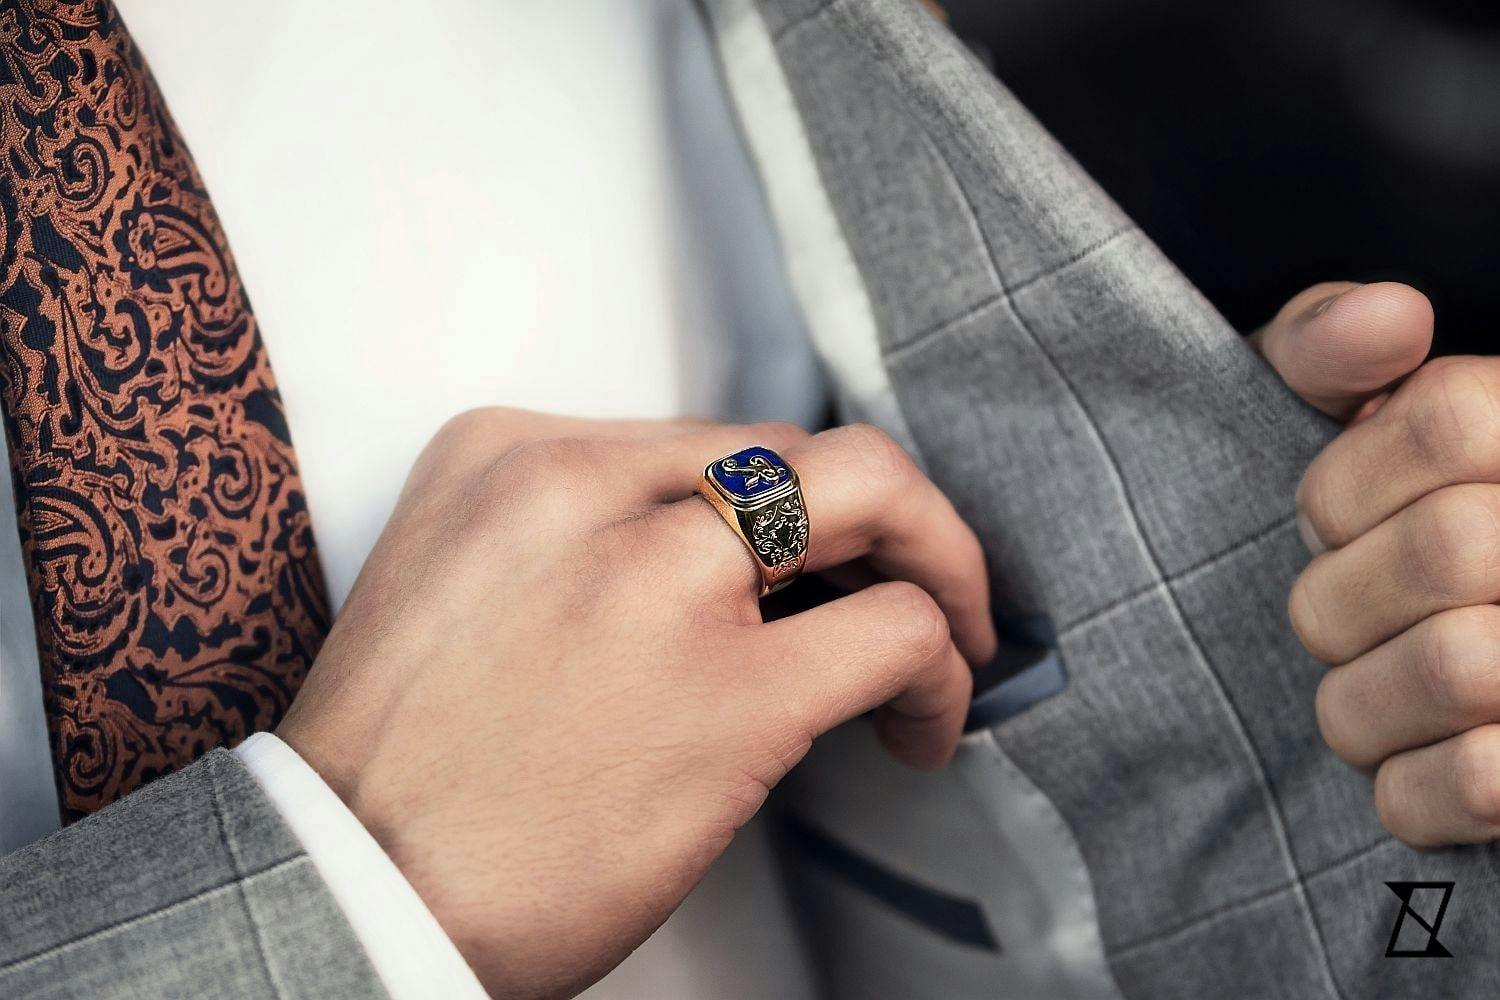 Lapis lazuli signet ring on the hand of a businessman.